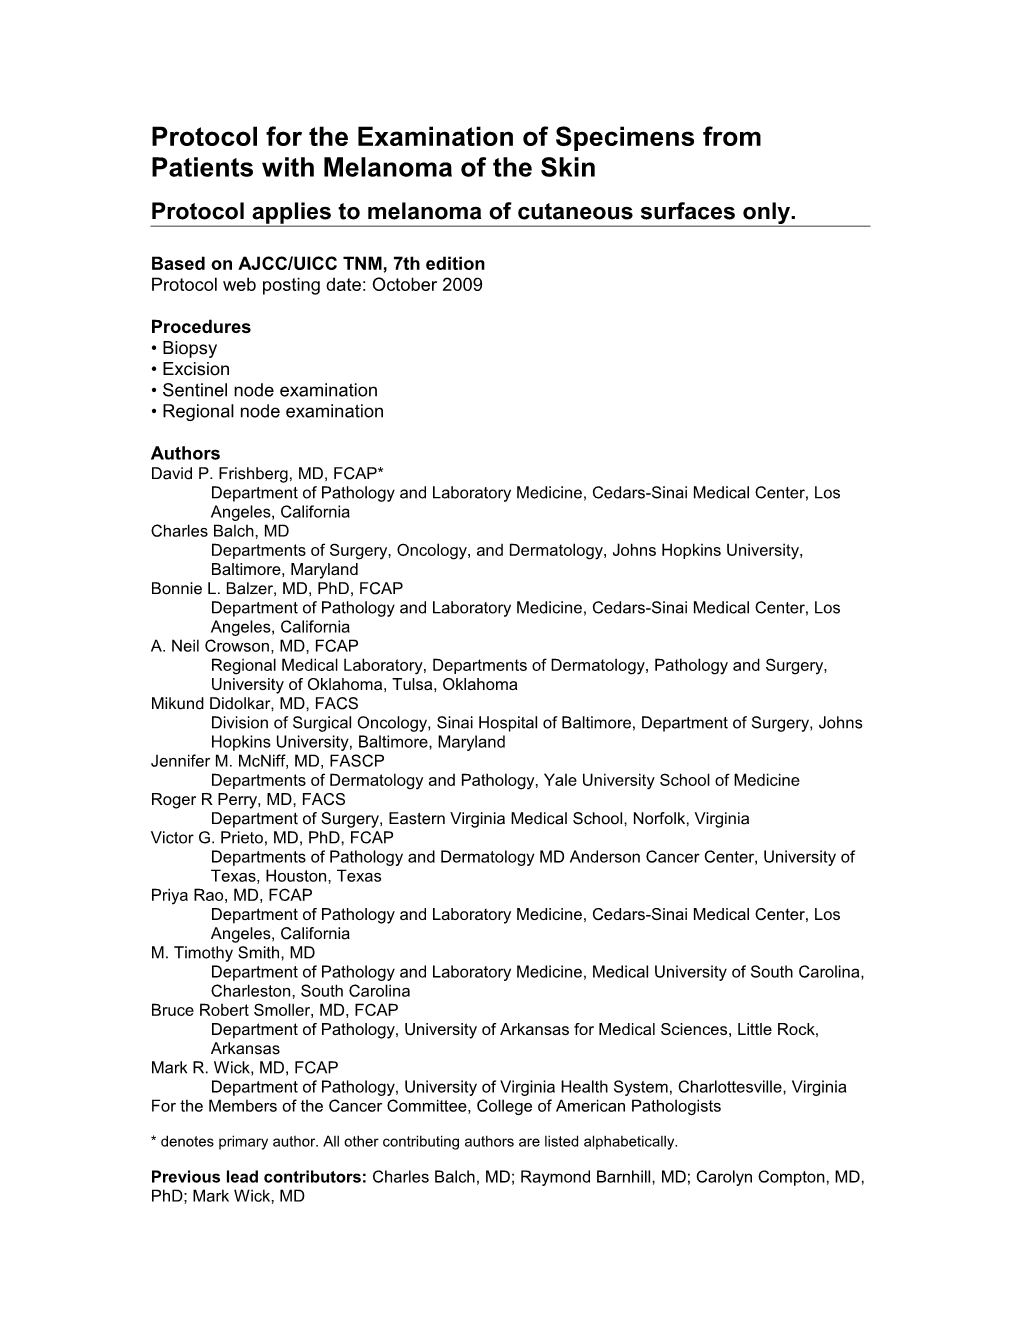 Protocol for the Examination of Specimens from Patientswith Melanoma of the Skin